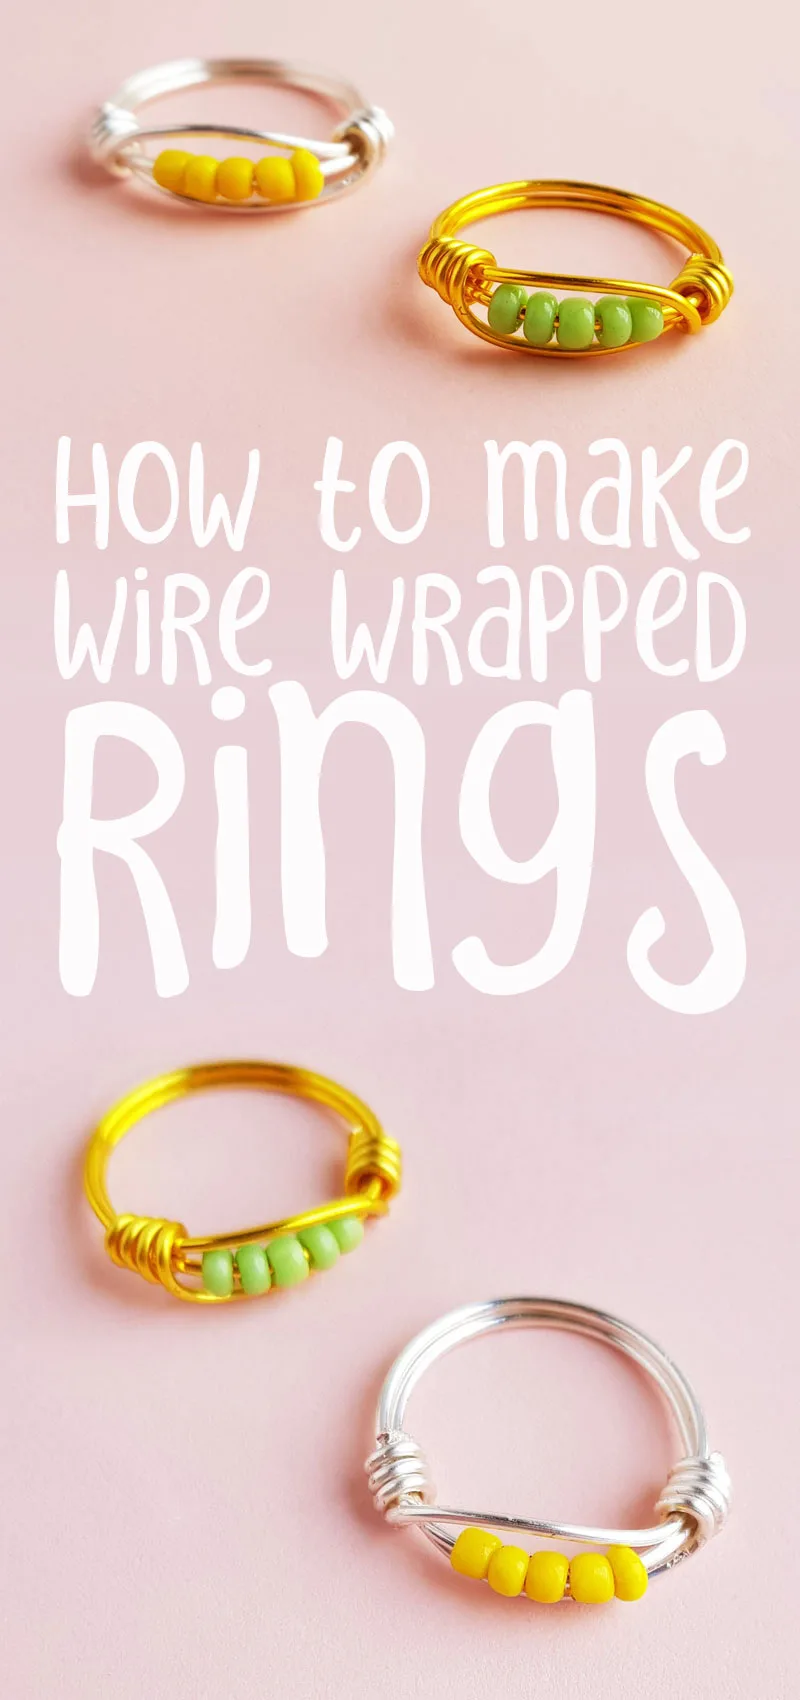 DIY wire wrapped rings tutorial for beginners